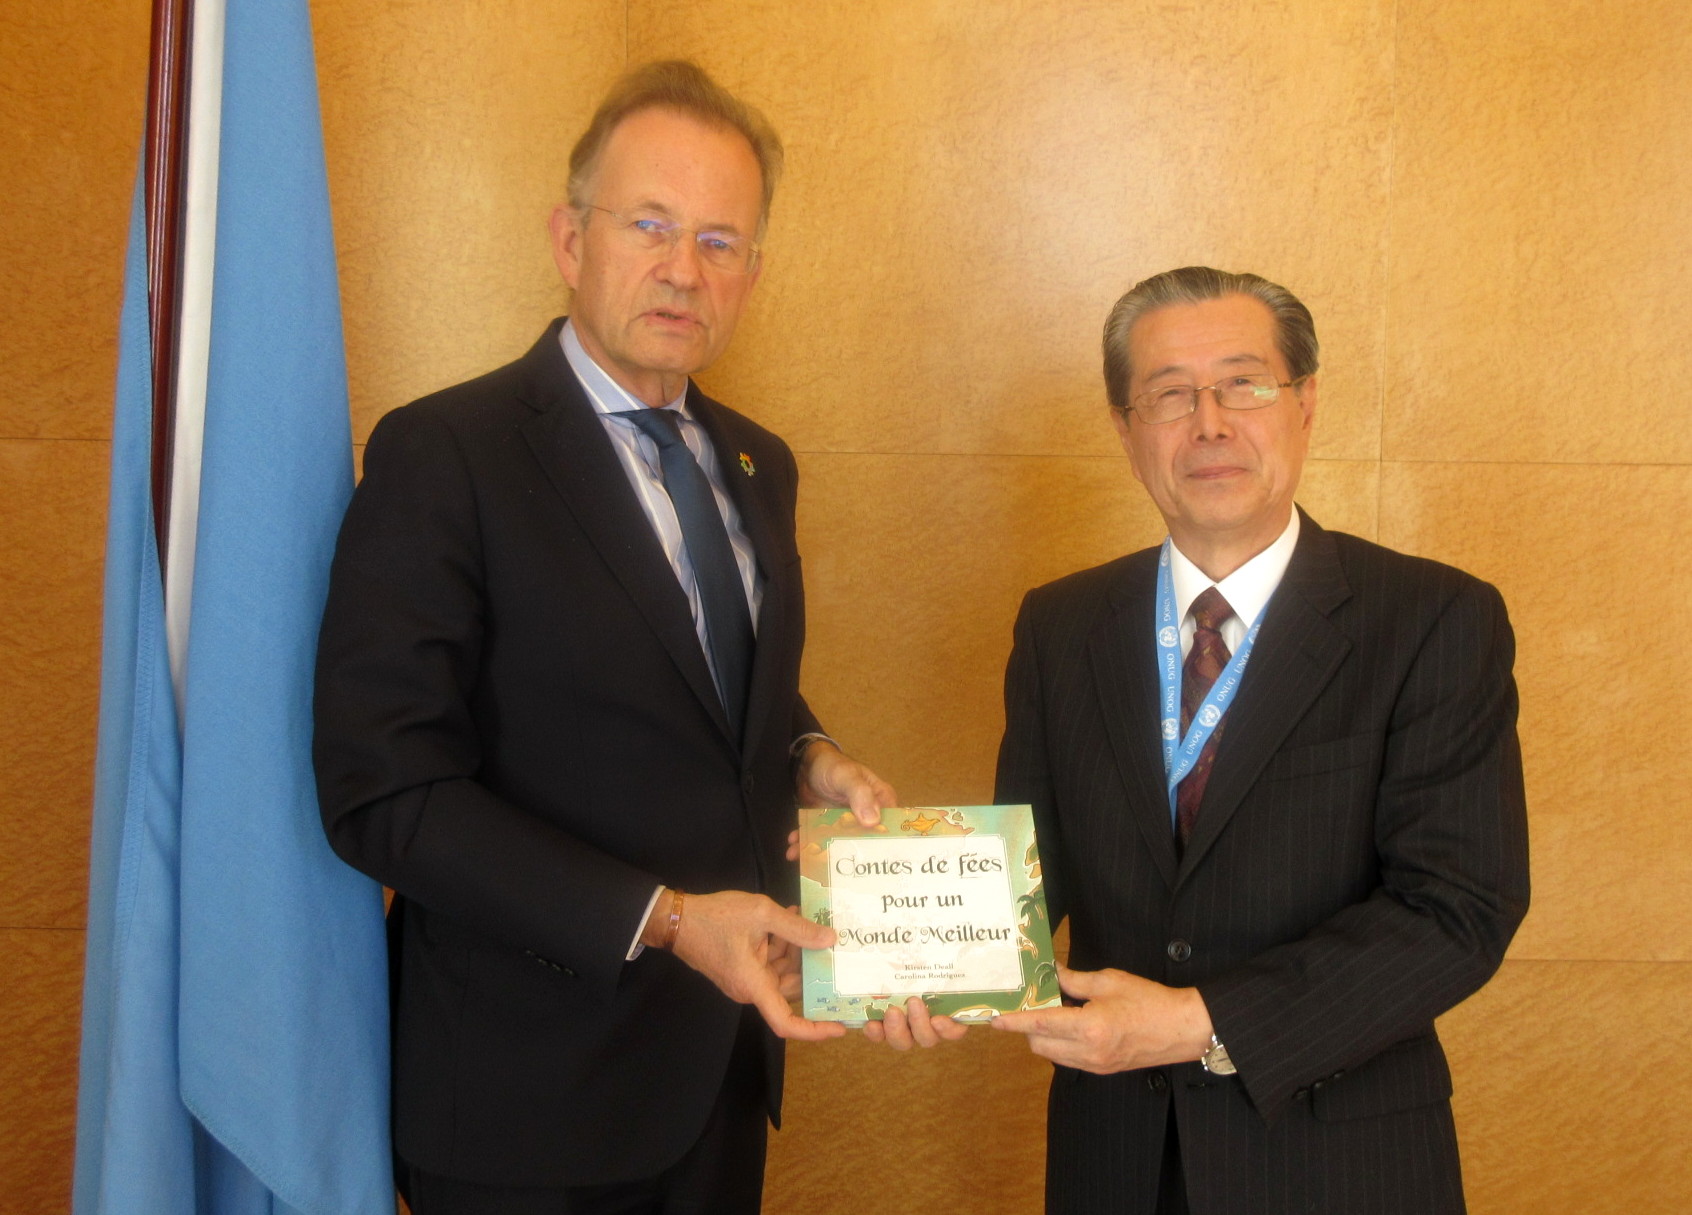 Meeting with Mr. Moller, Director-General of United Nations Office at Geneva